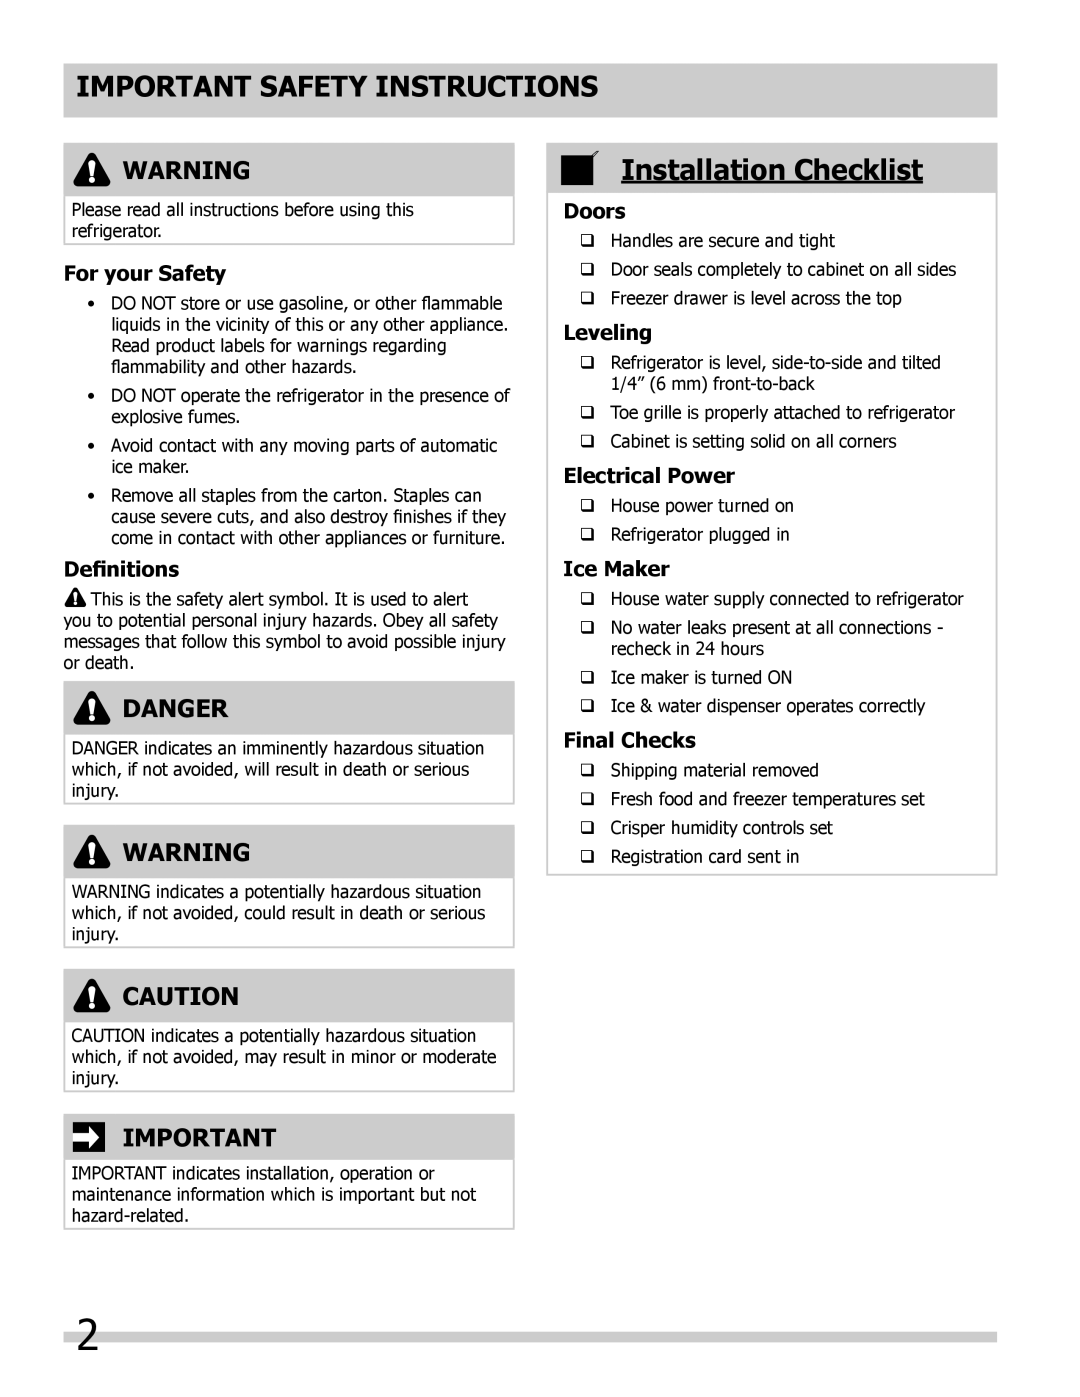 Frigidaire FGHB2869LP Important Safety Instructions, Installation Checklist, Danger, For your Safety, Definitions, Doors 